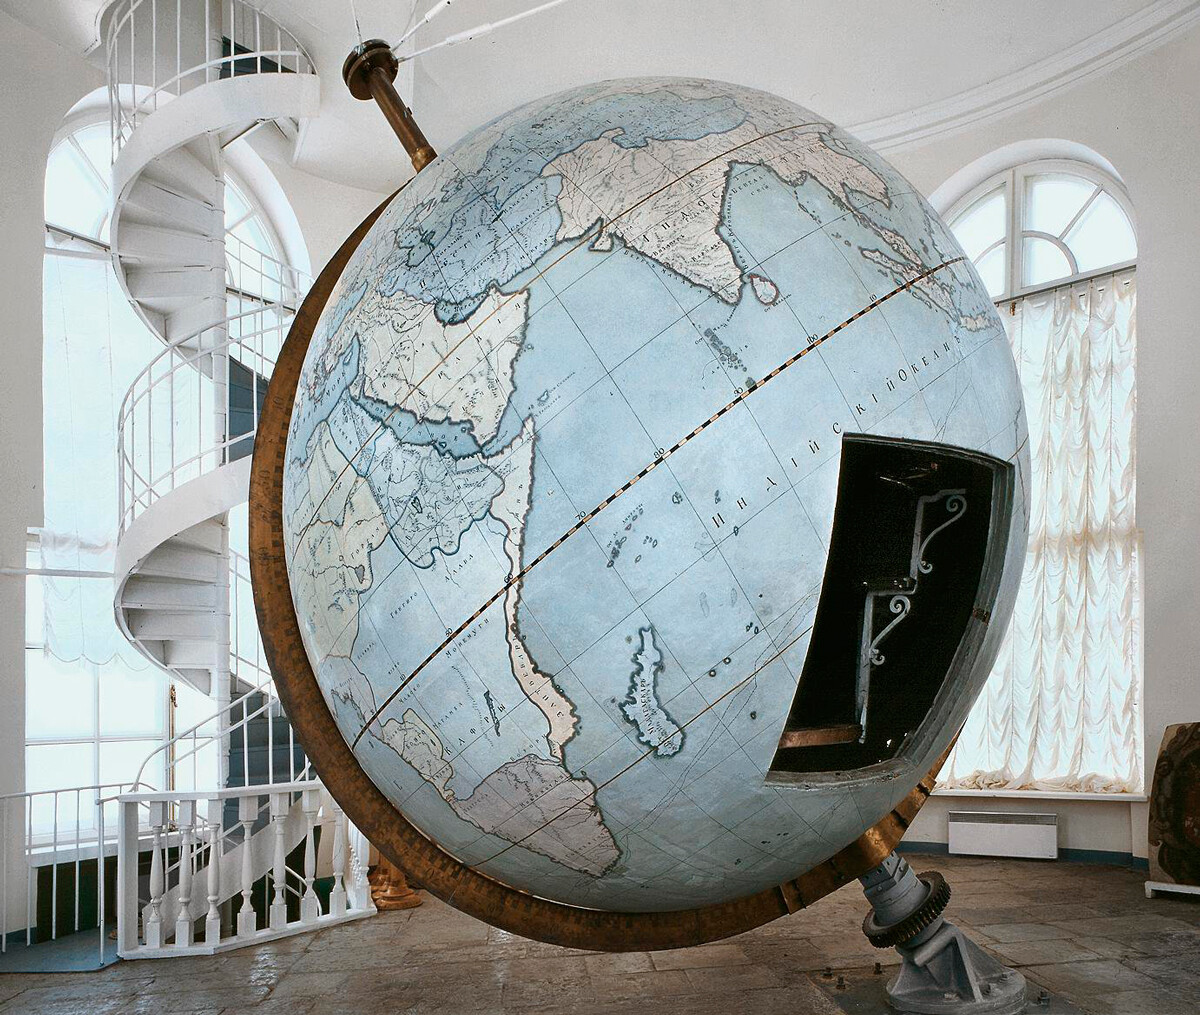 The Great Globe of Gottorf